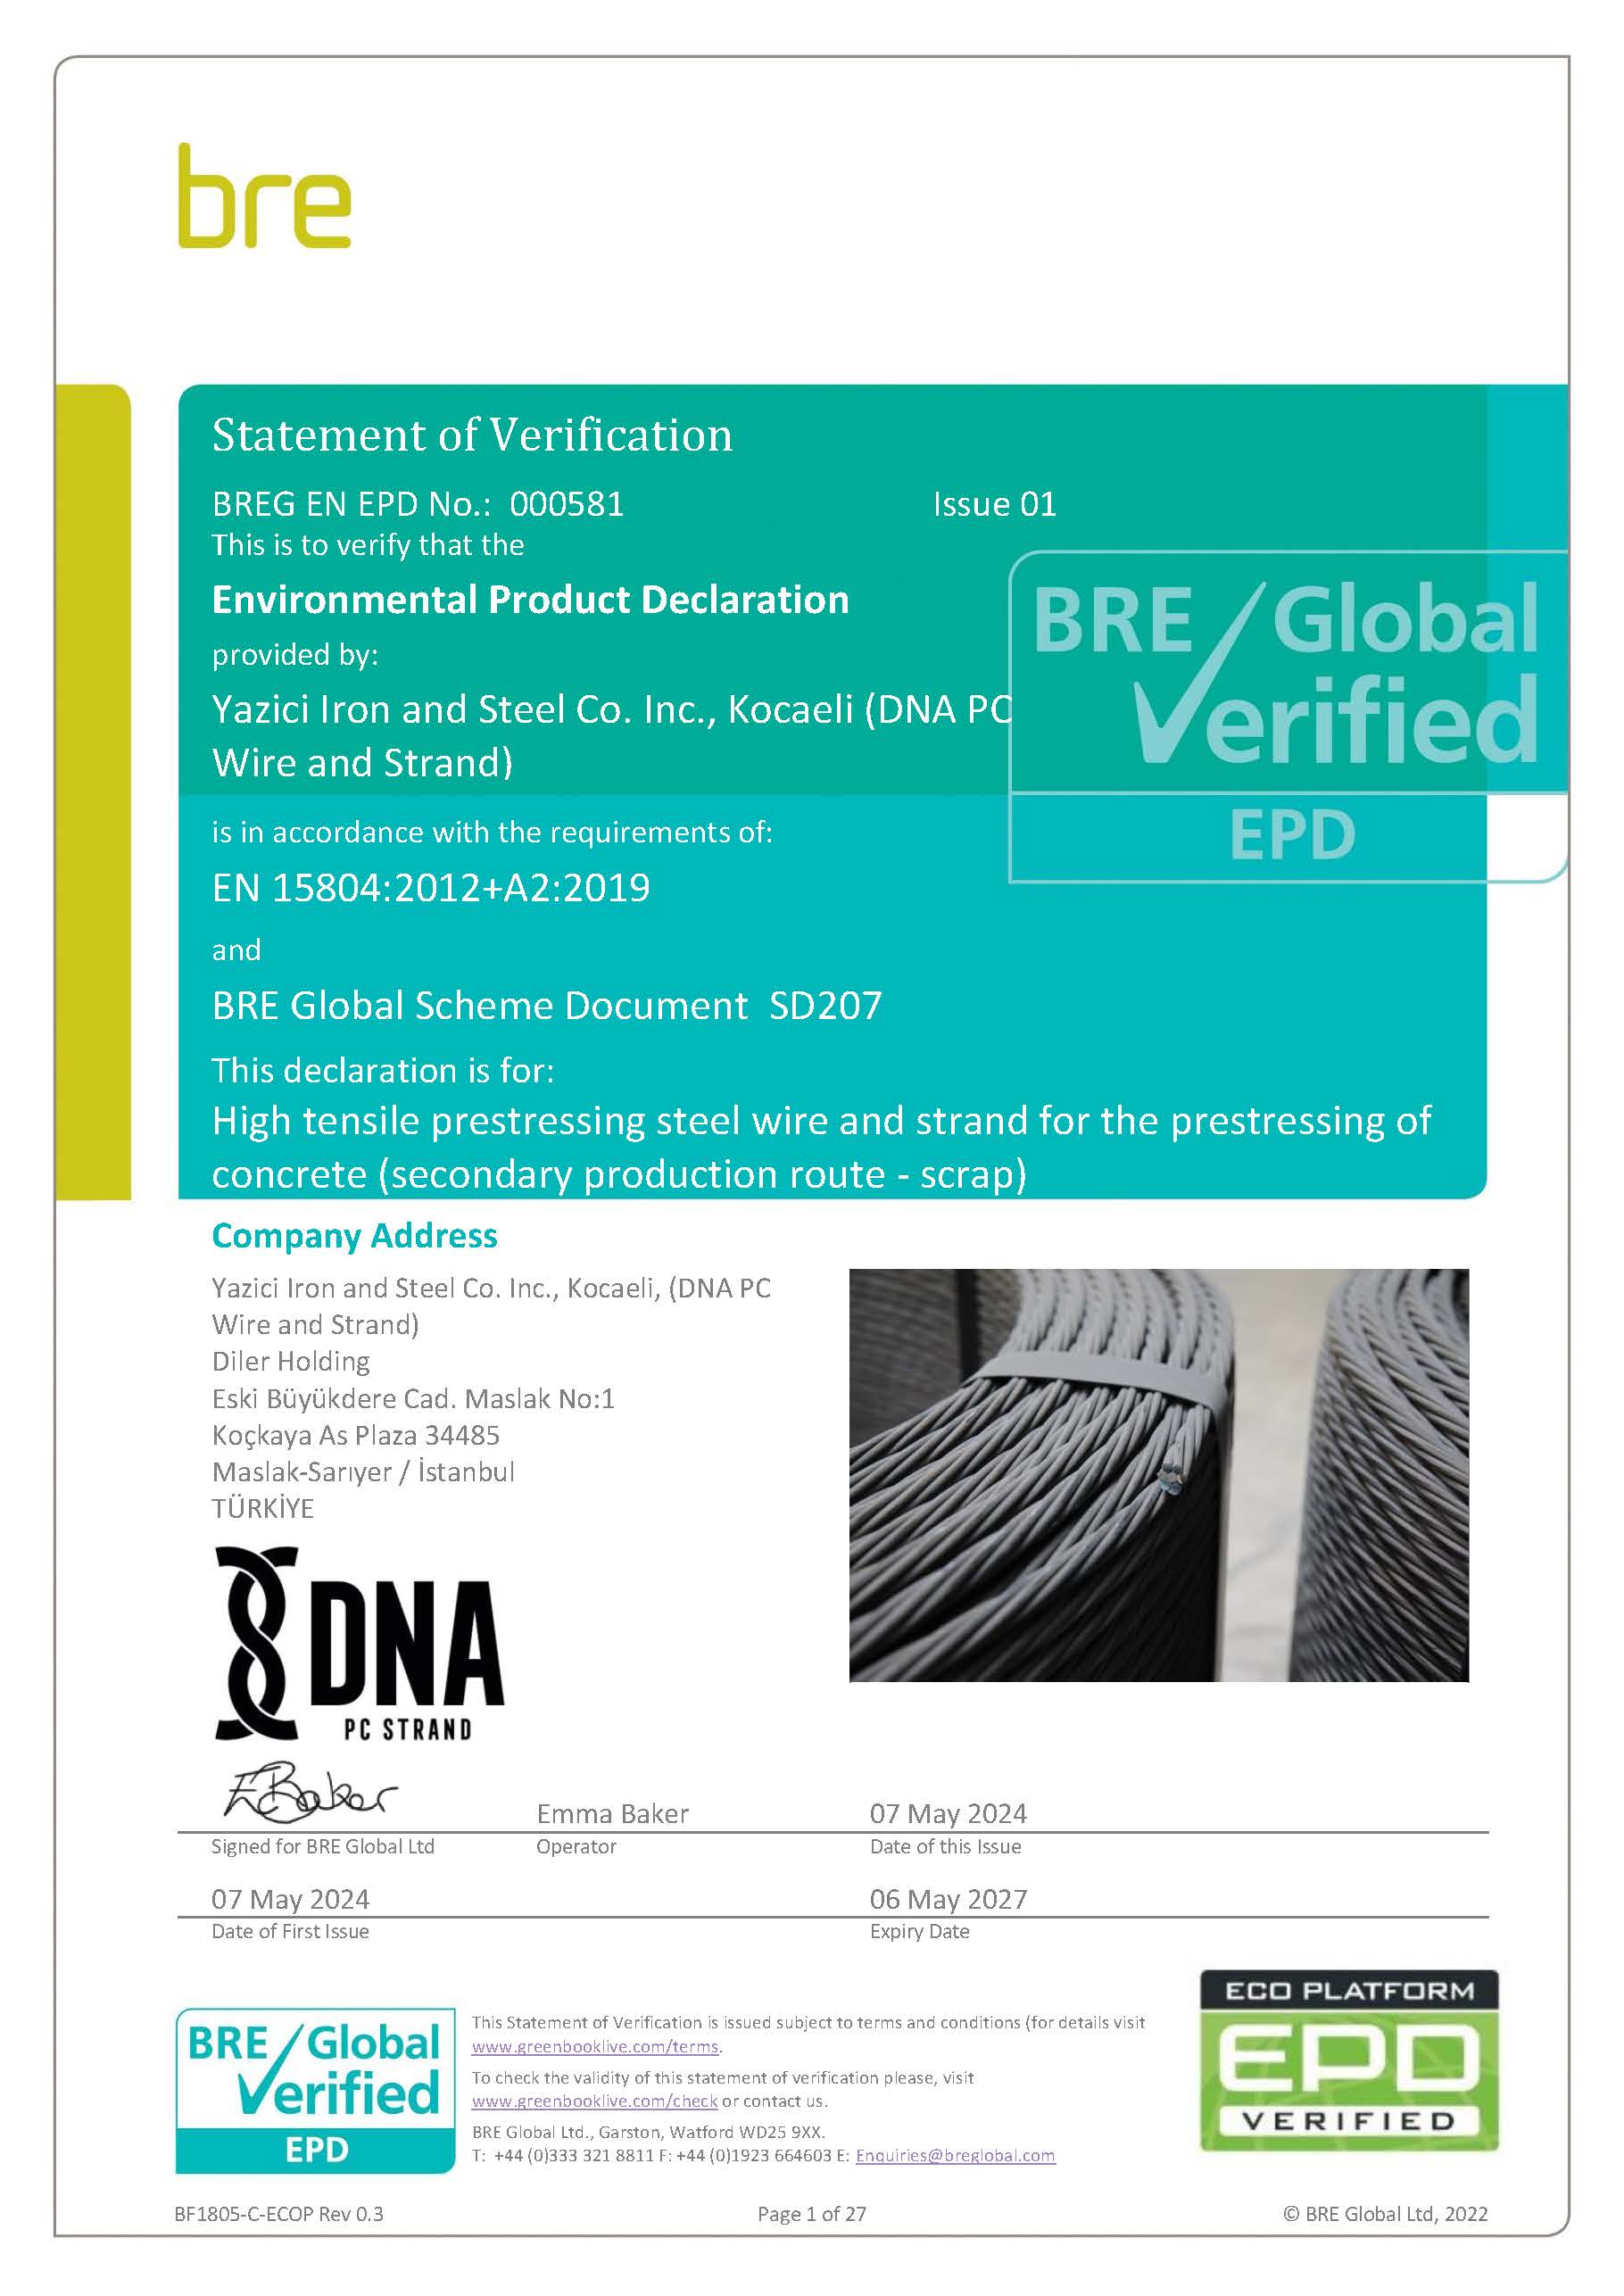 Yazici Iron and Steel Co. Inc., Kocaeli (DNA PC Wire and Strand) EPD